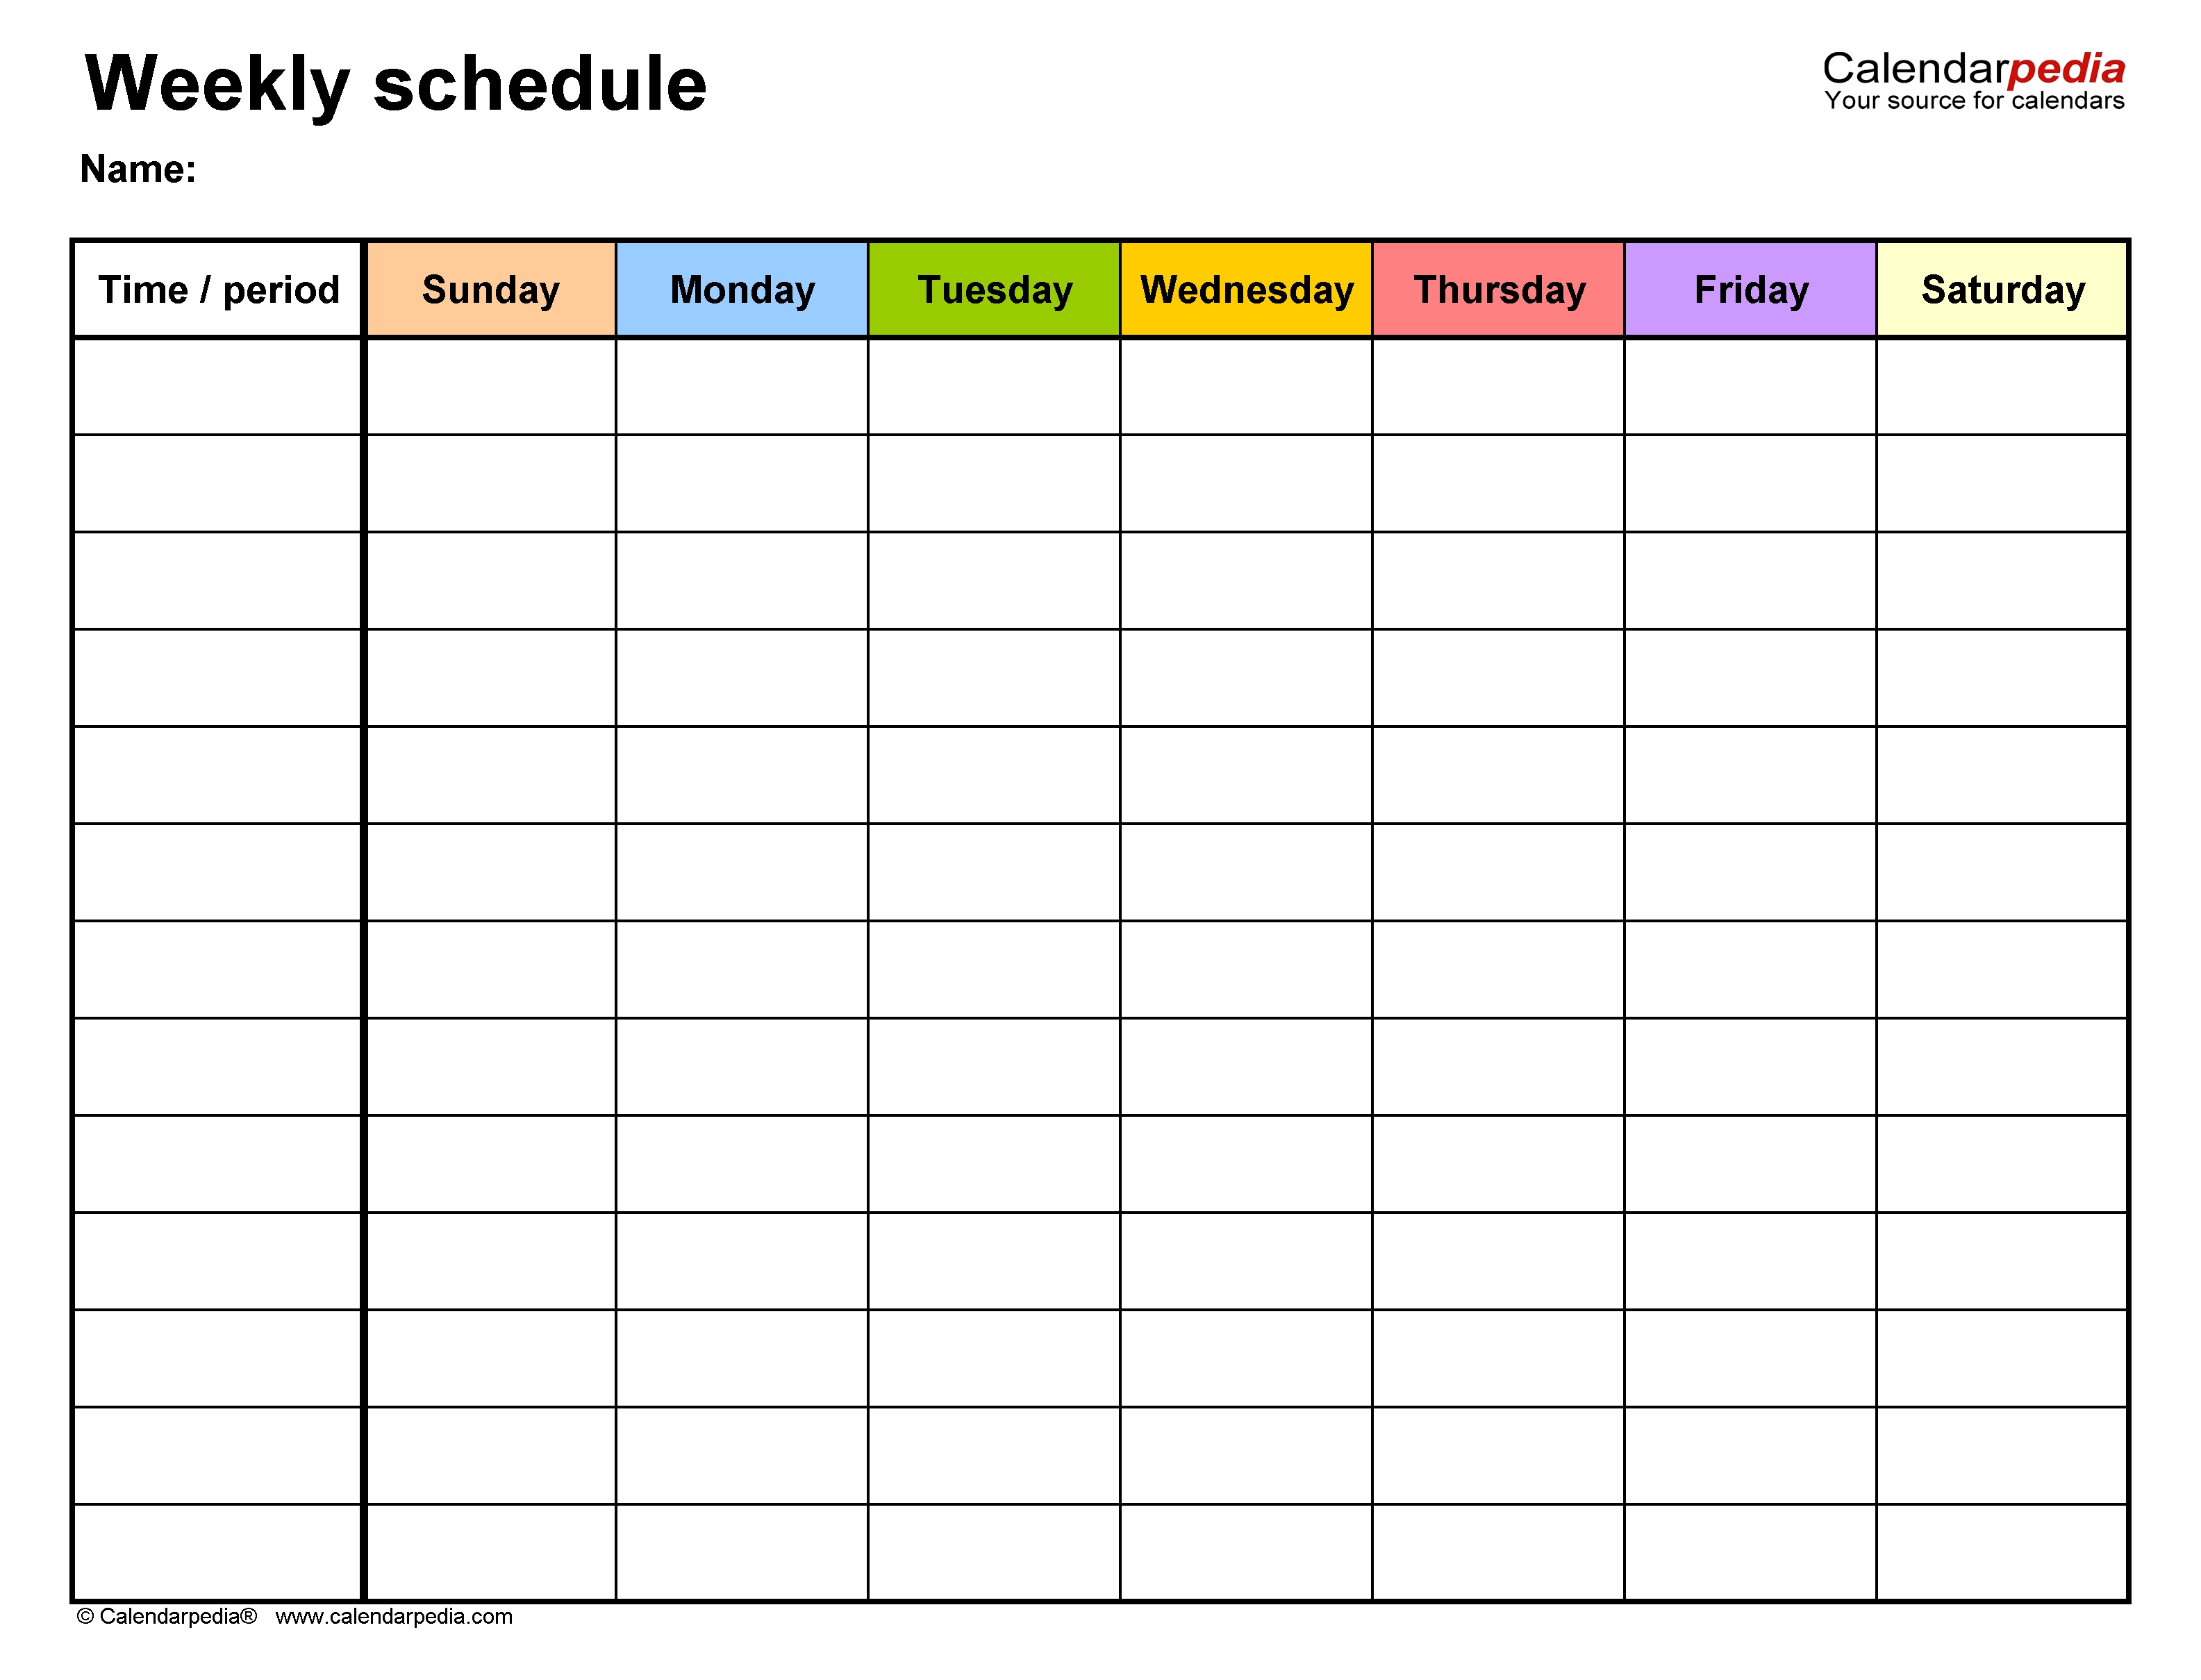 Free Weekly Schedules For Word - 18 Templates Calendar Template In Microsoft Word